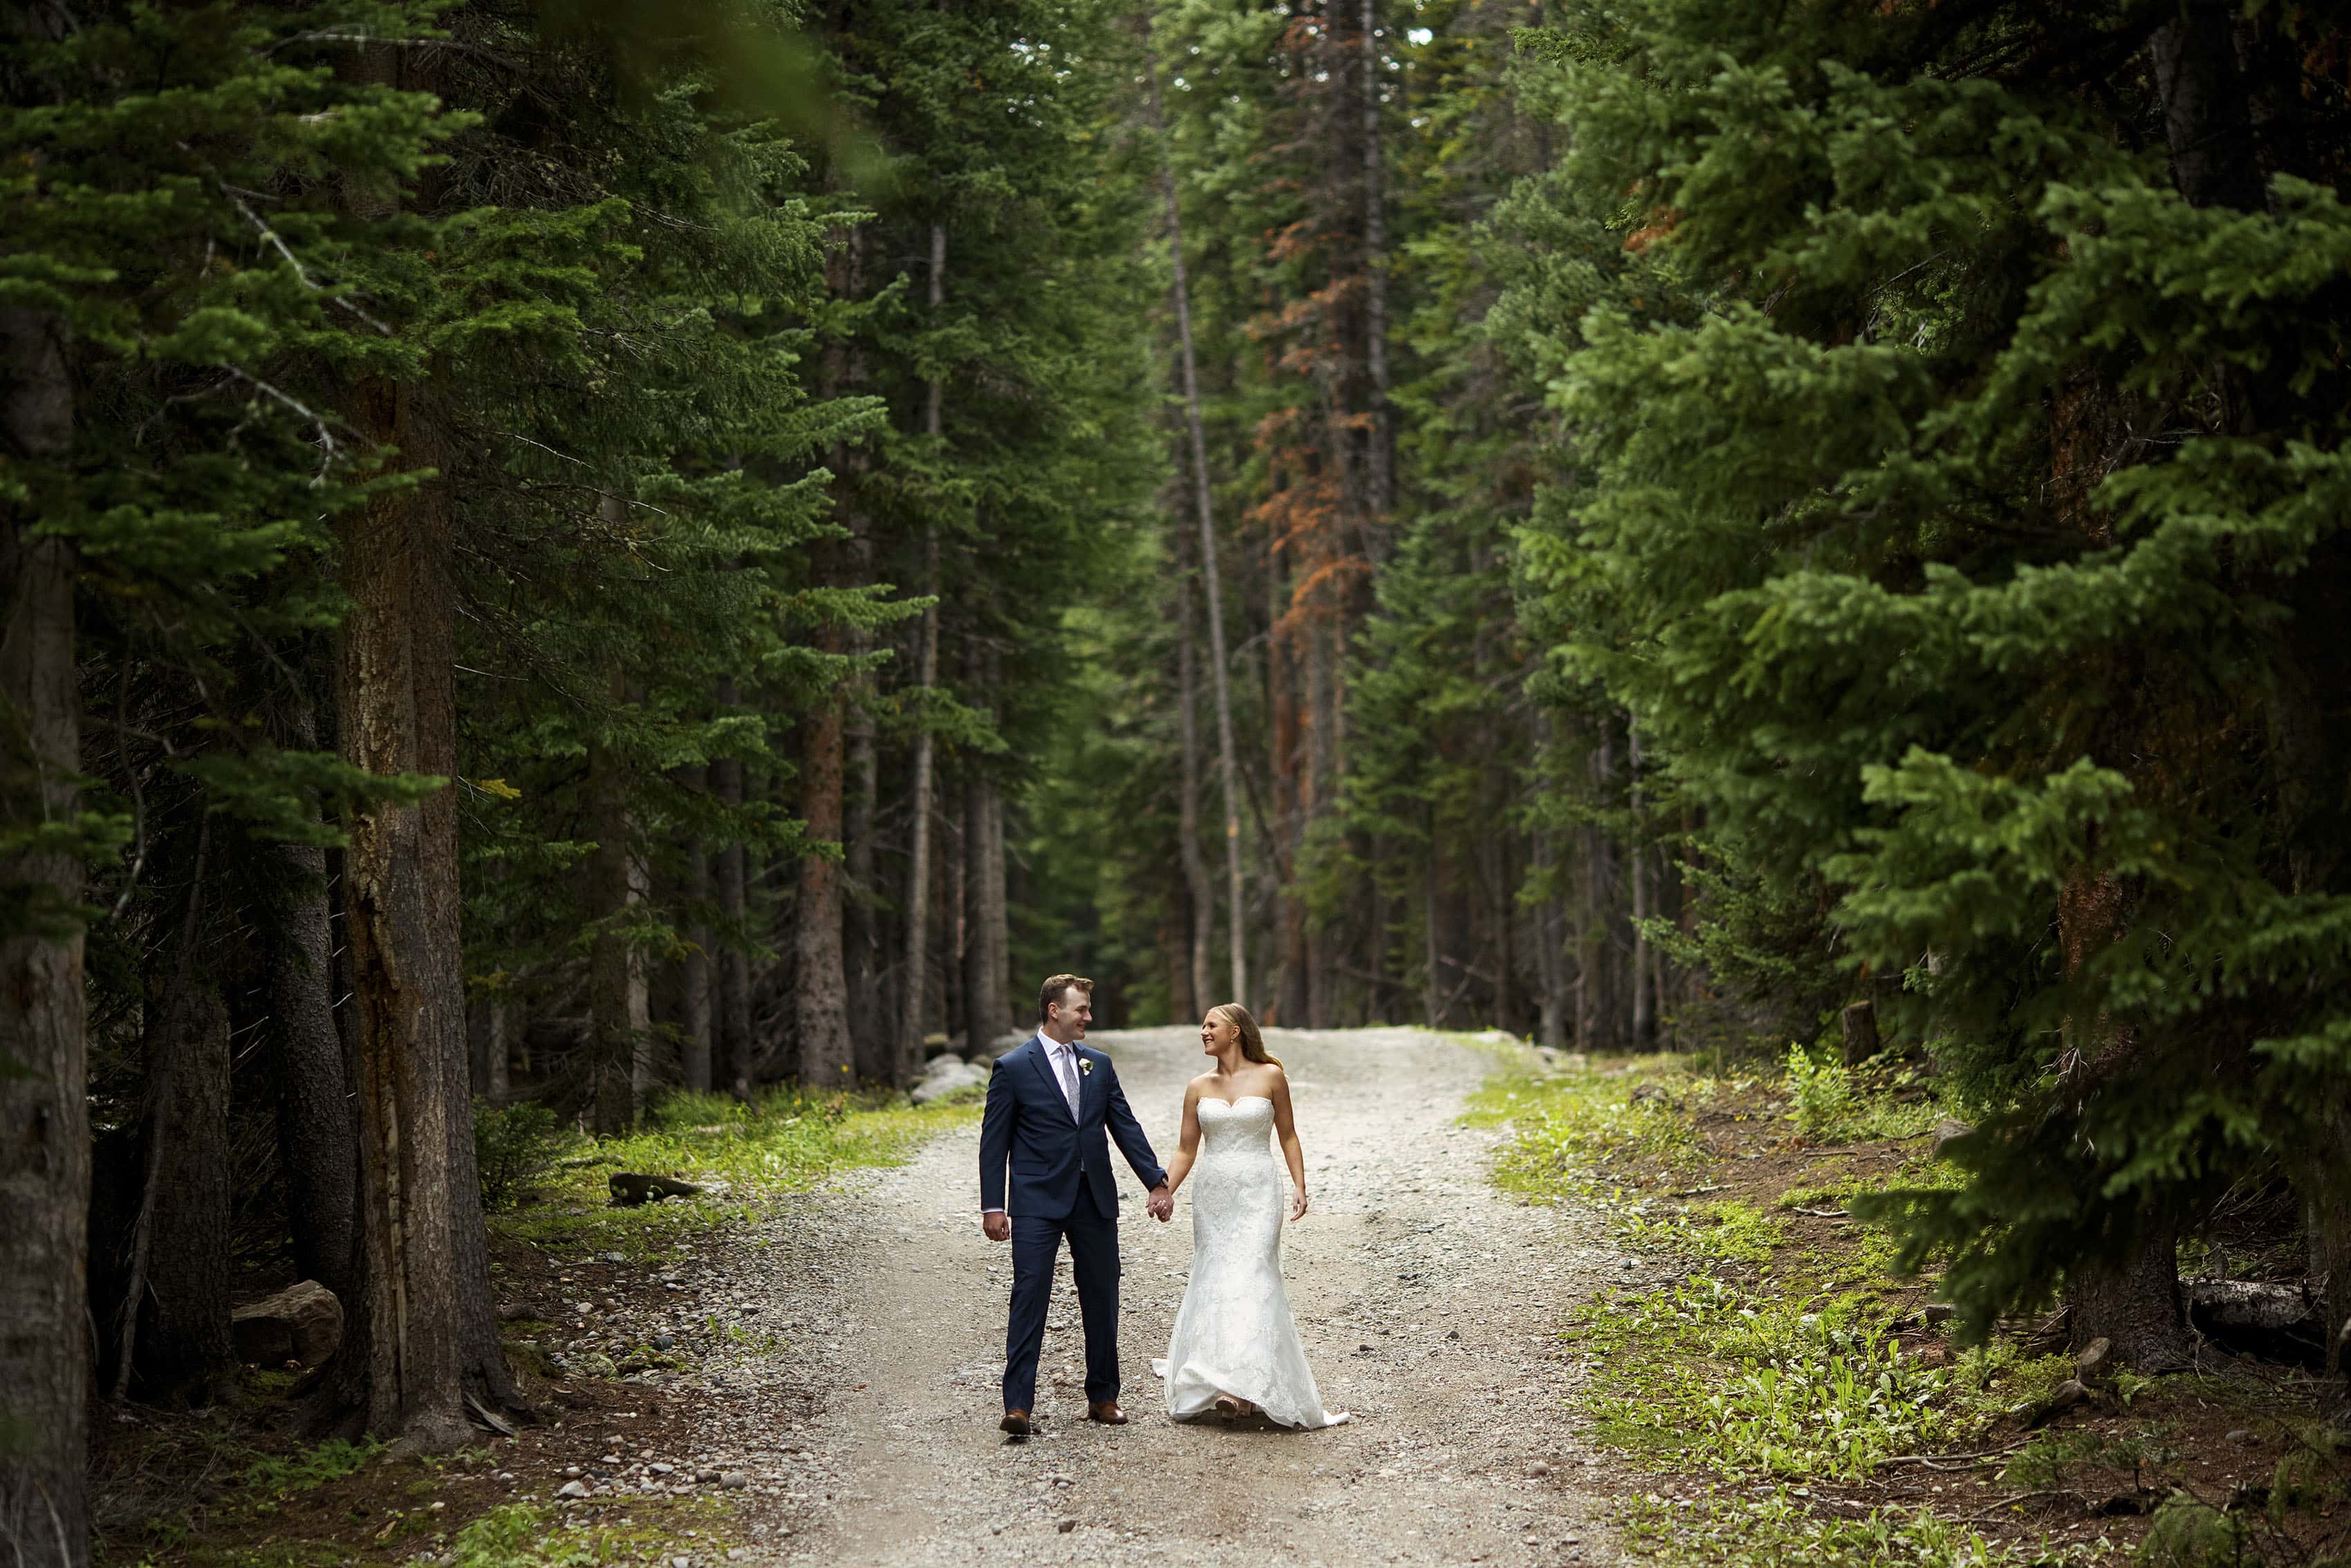 The groom and bride walk together along the road on Shrine Pass